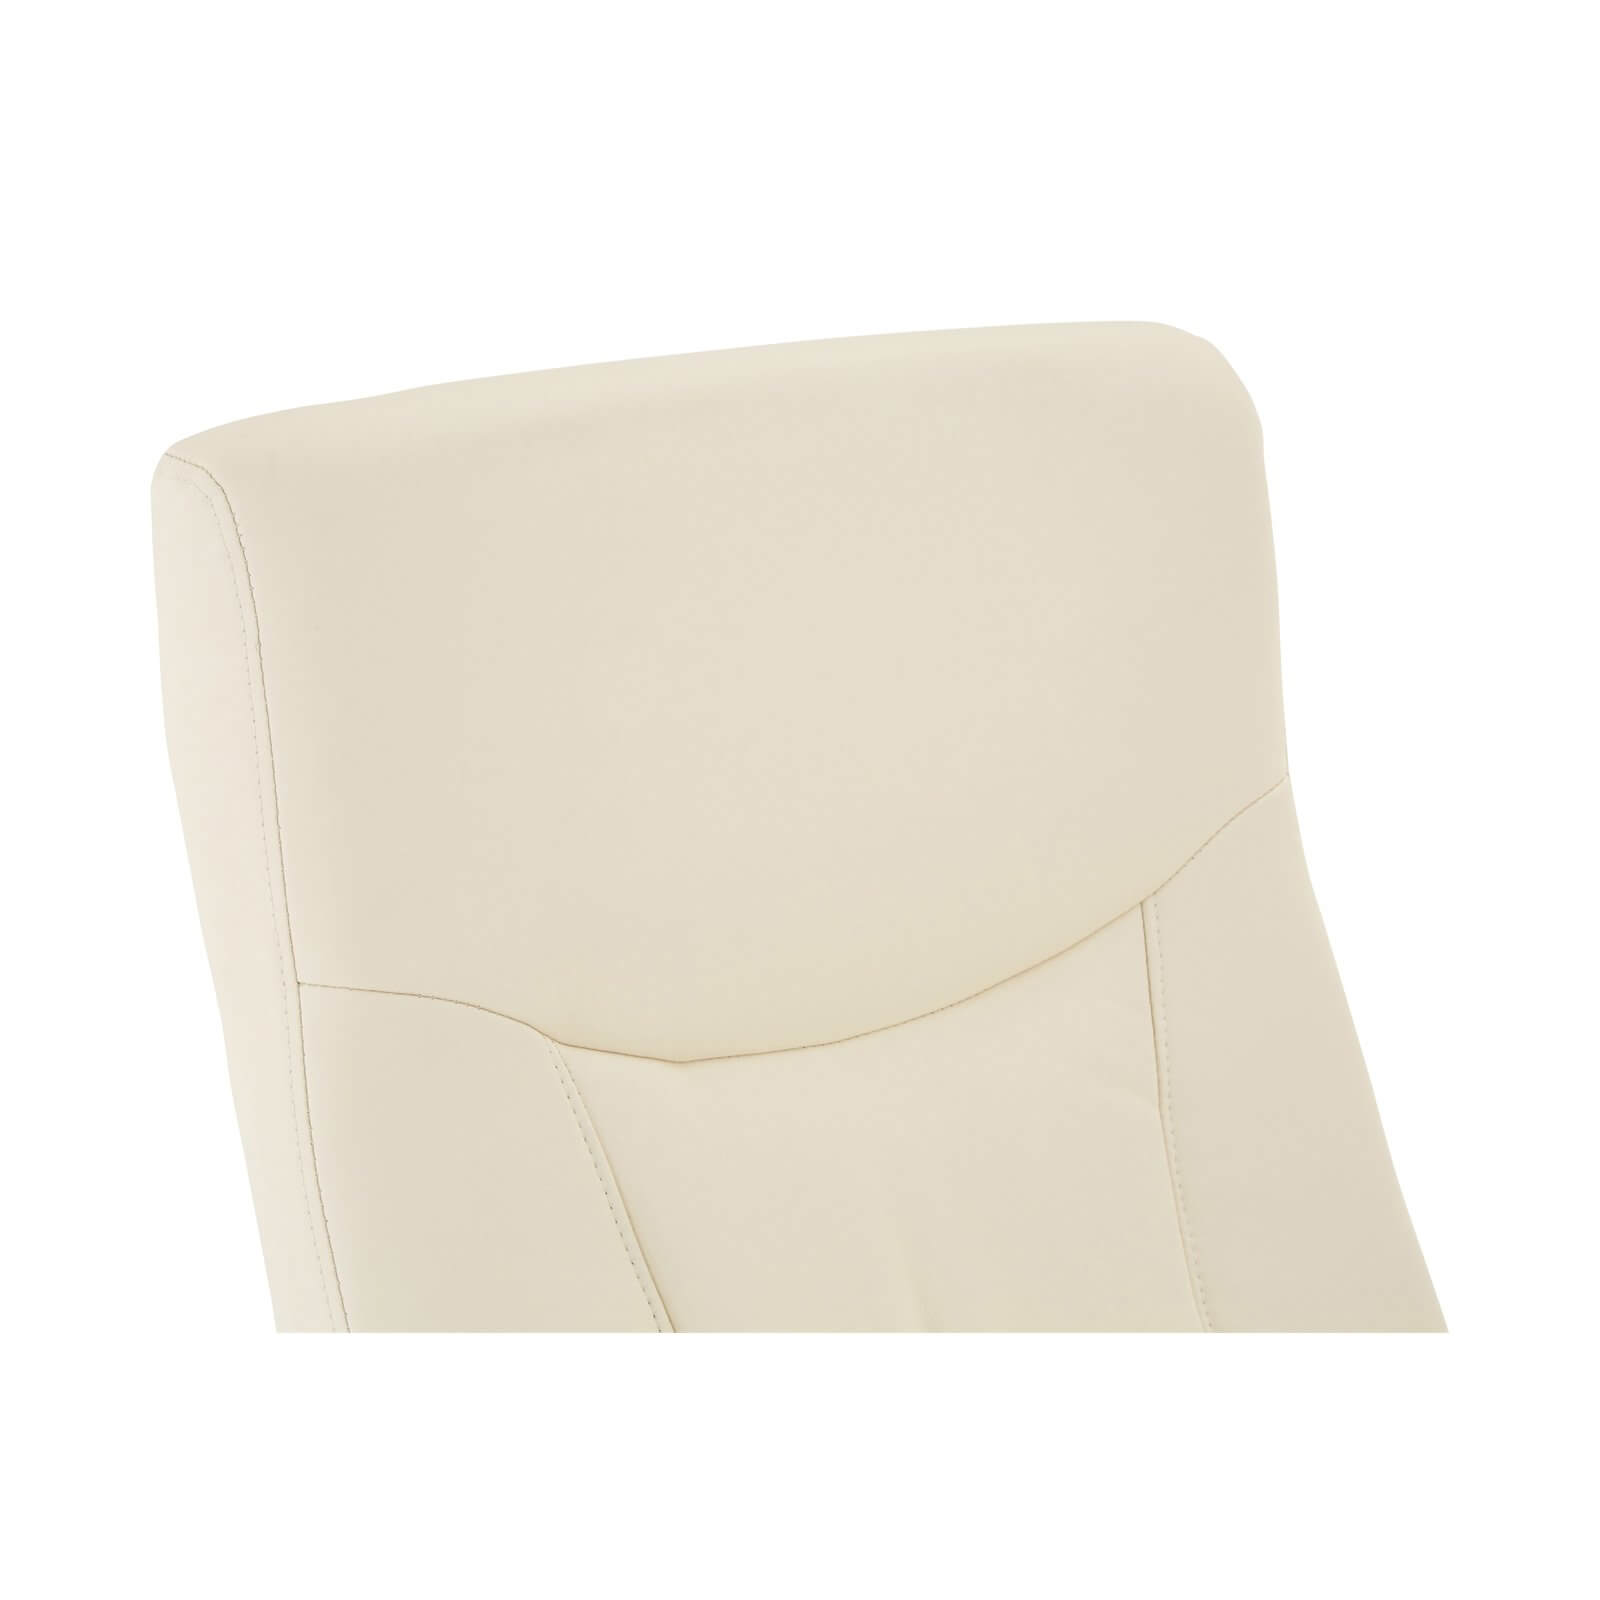 Leather Effect Recliner & Footstool - White